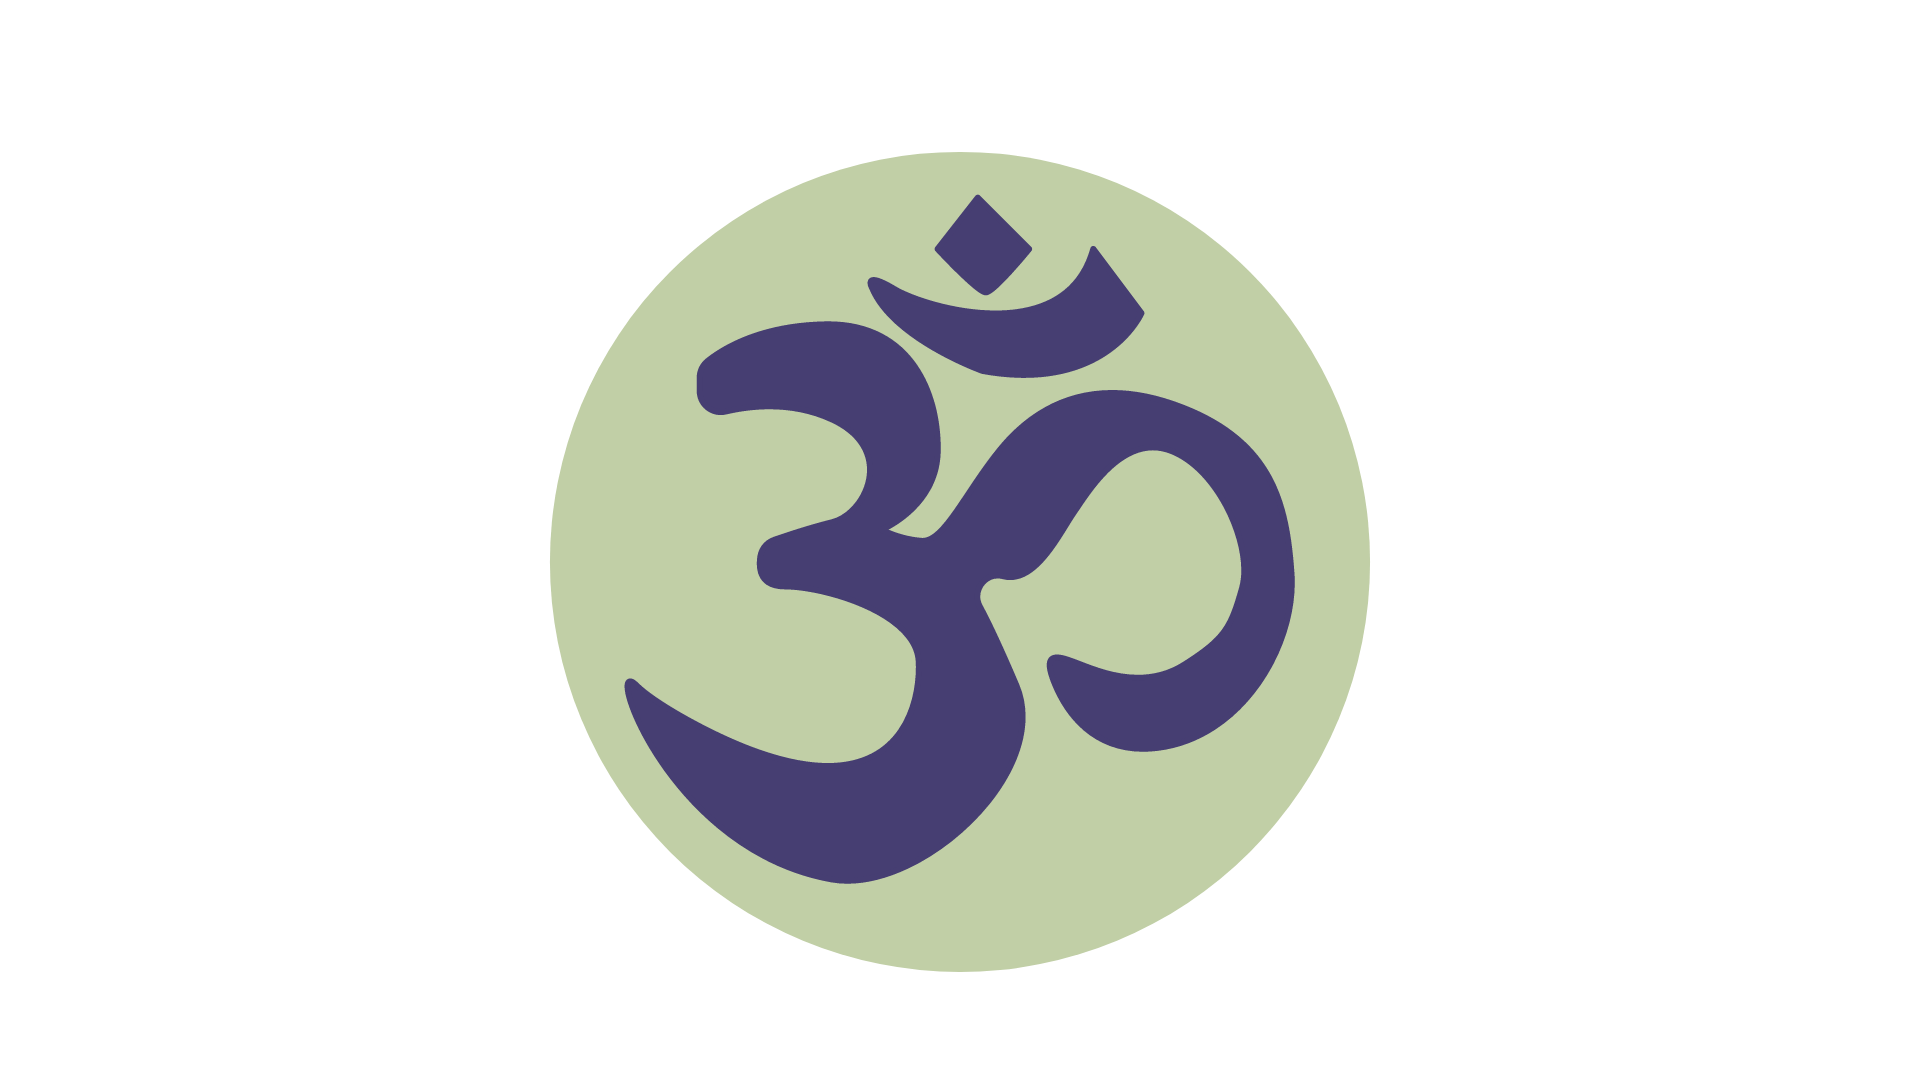 Free Infographic: Mindful Soul Center's Free OM AUM infographic and MP3 meditation download